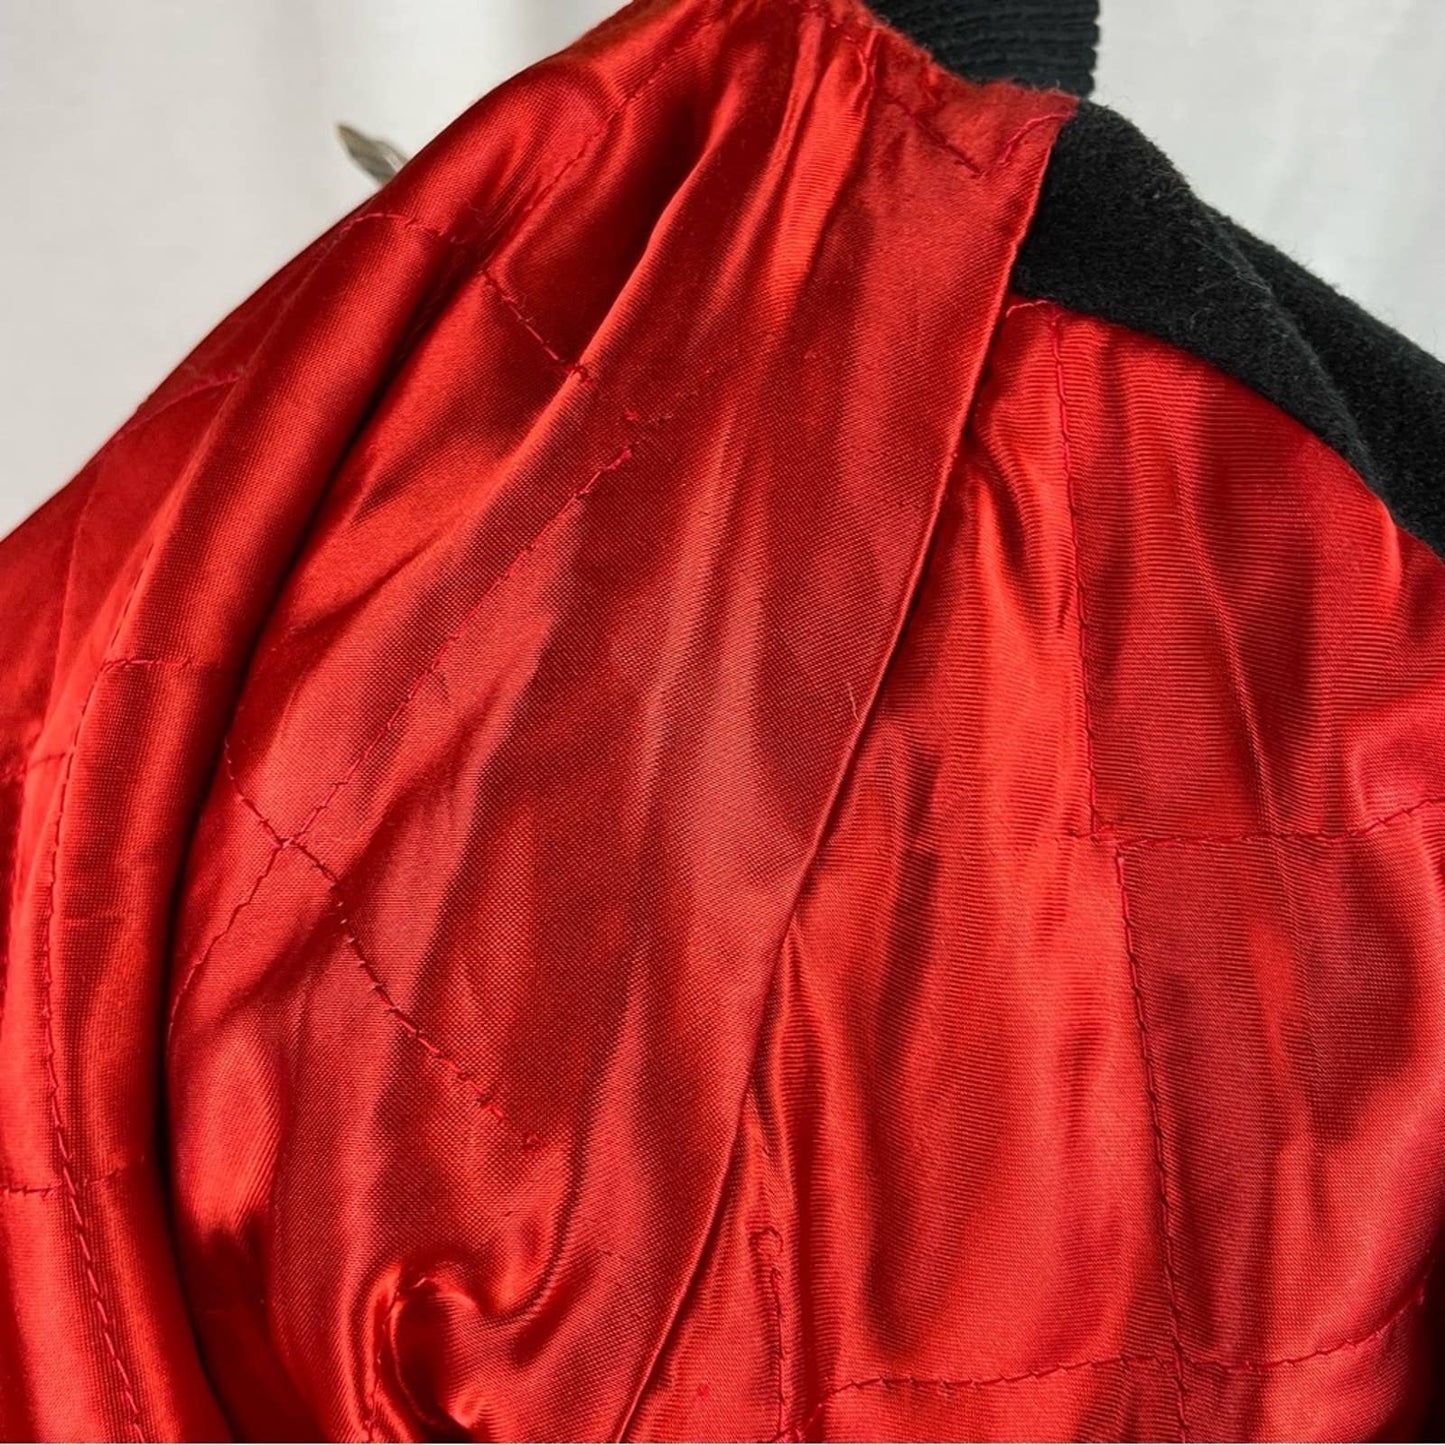 Vintage The Limited 90s Varsity Letterman Bomber Jacket Red Leather Black Wool Size S